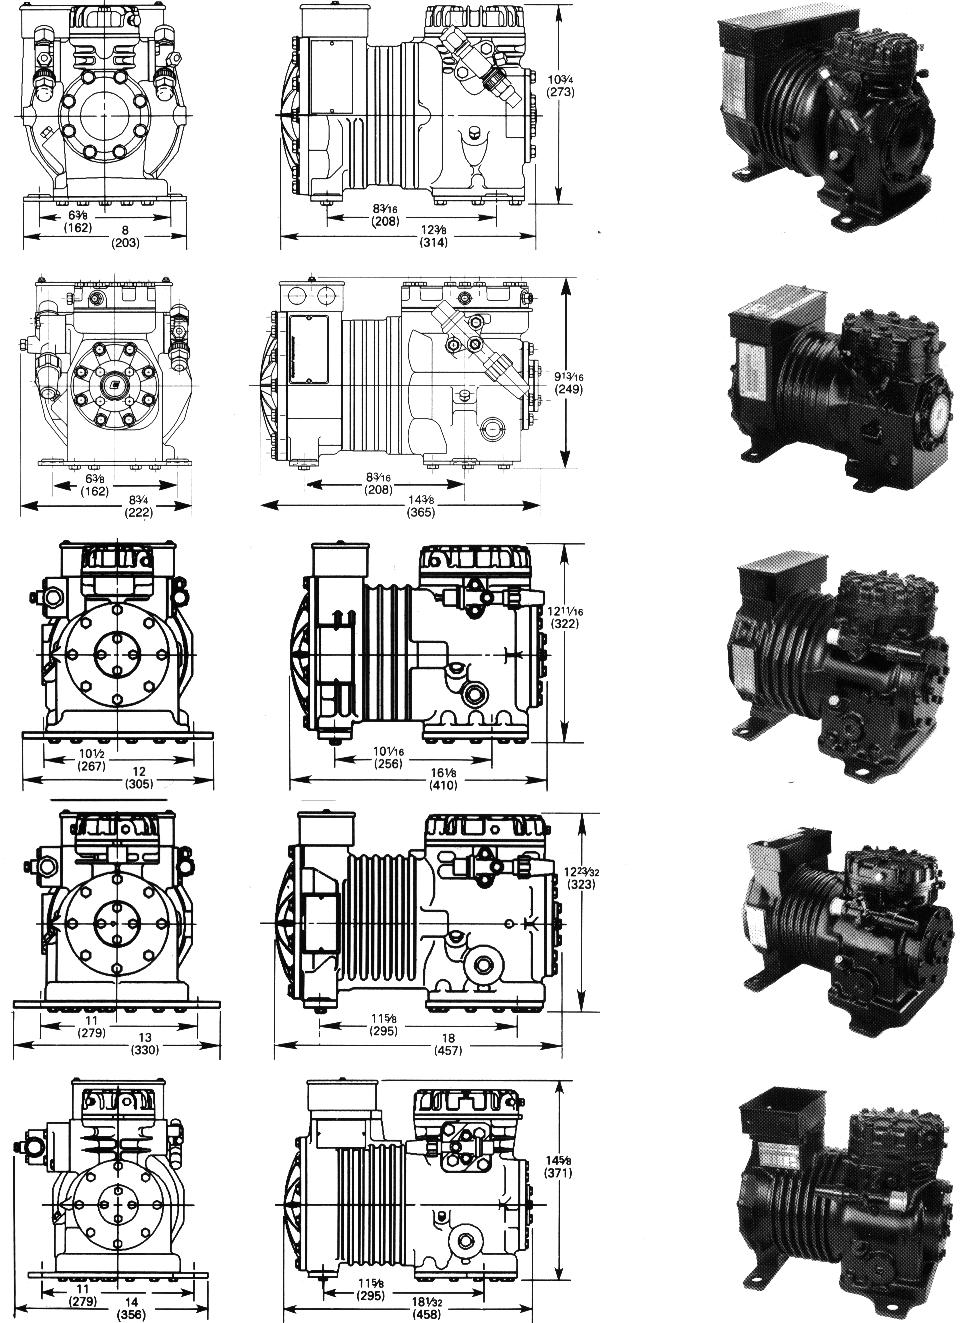 CONVENTIONAL COMPRESSORS DIMENSIONS AND PHOTOGRAPHS HA F A M I L Y Model HAJ1-005 Shown KA F A M I L Y Model KATA-0150 Shown EA F A M I L Y